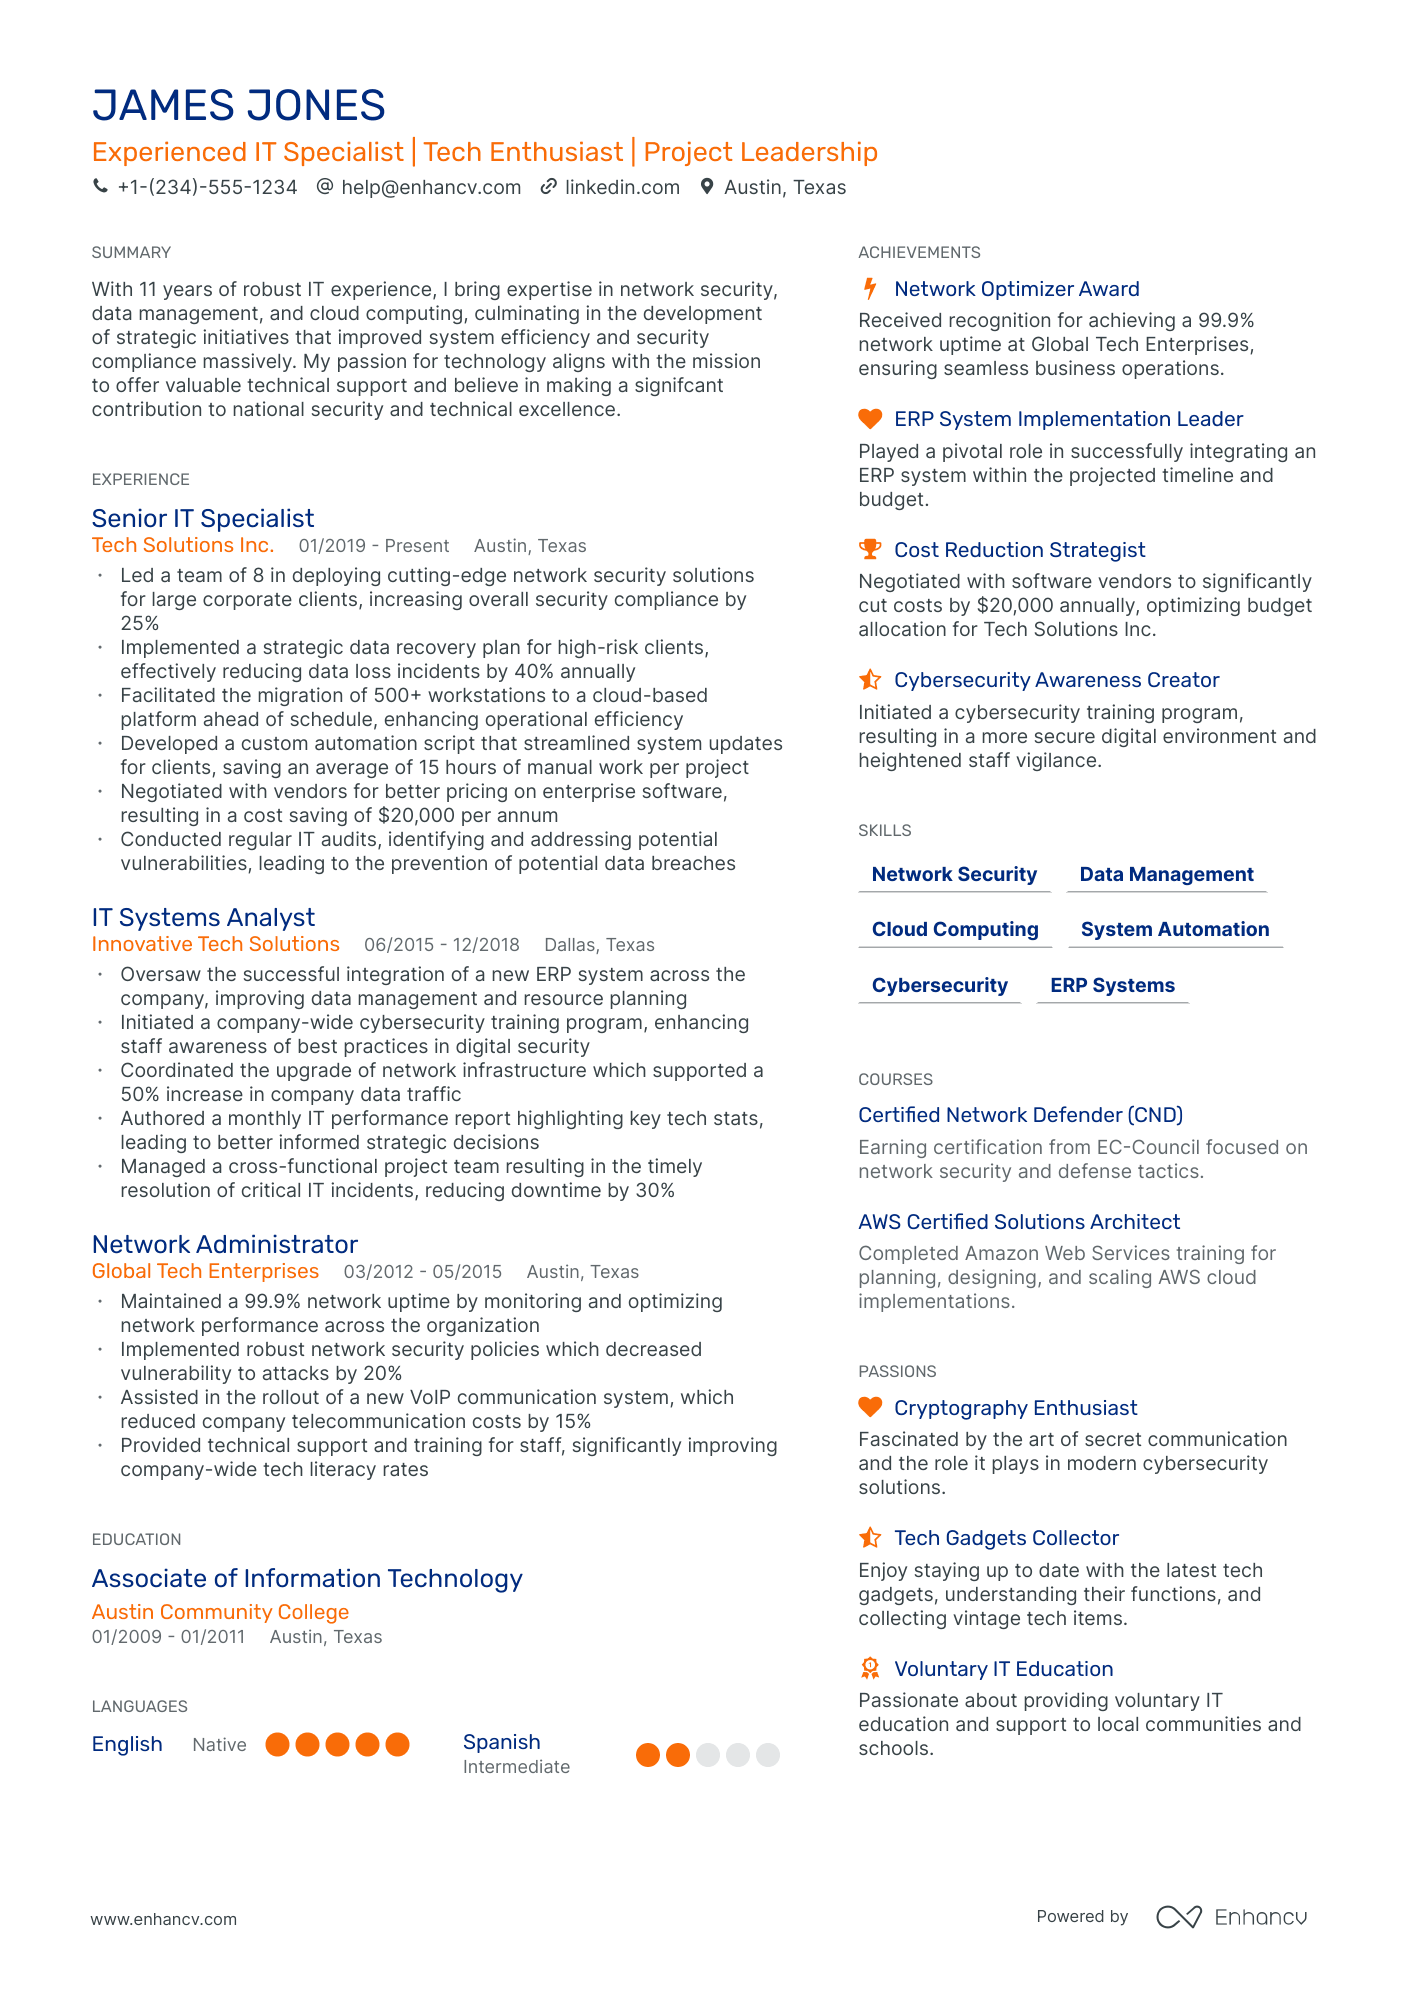 resume for military experience